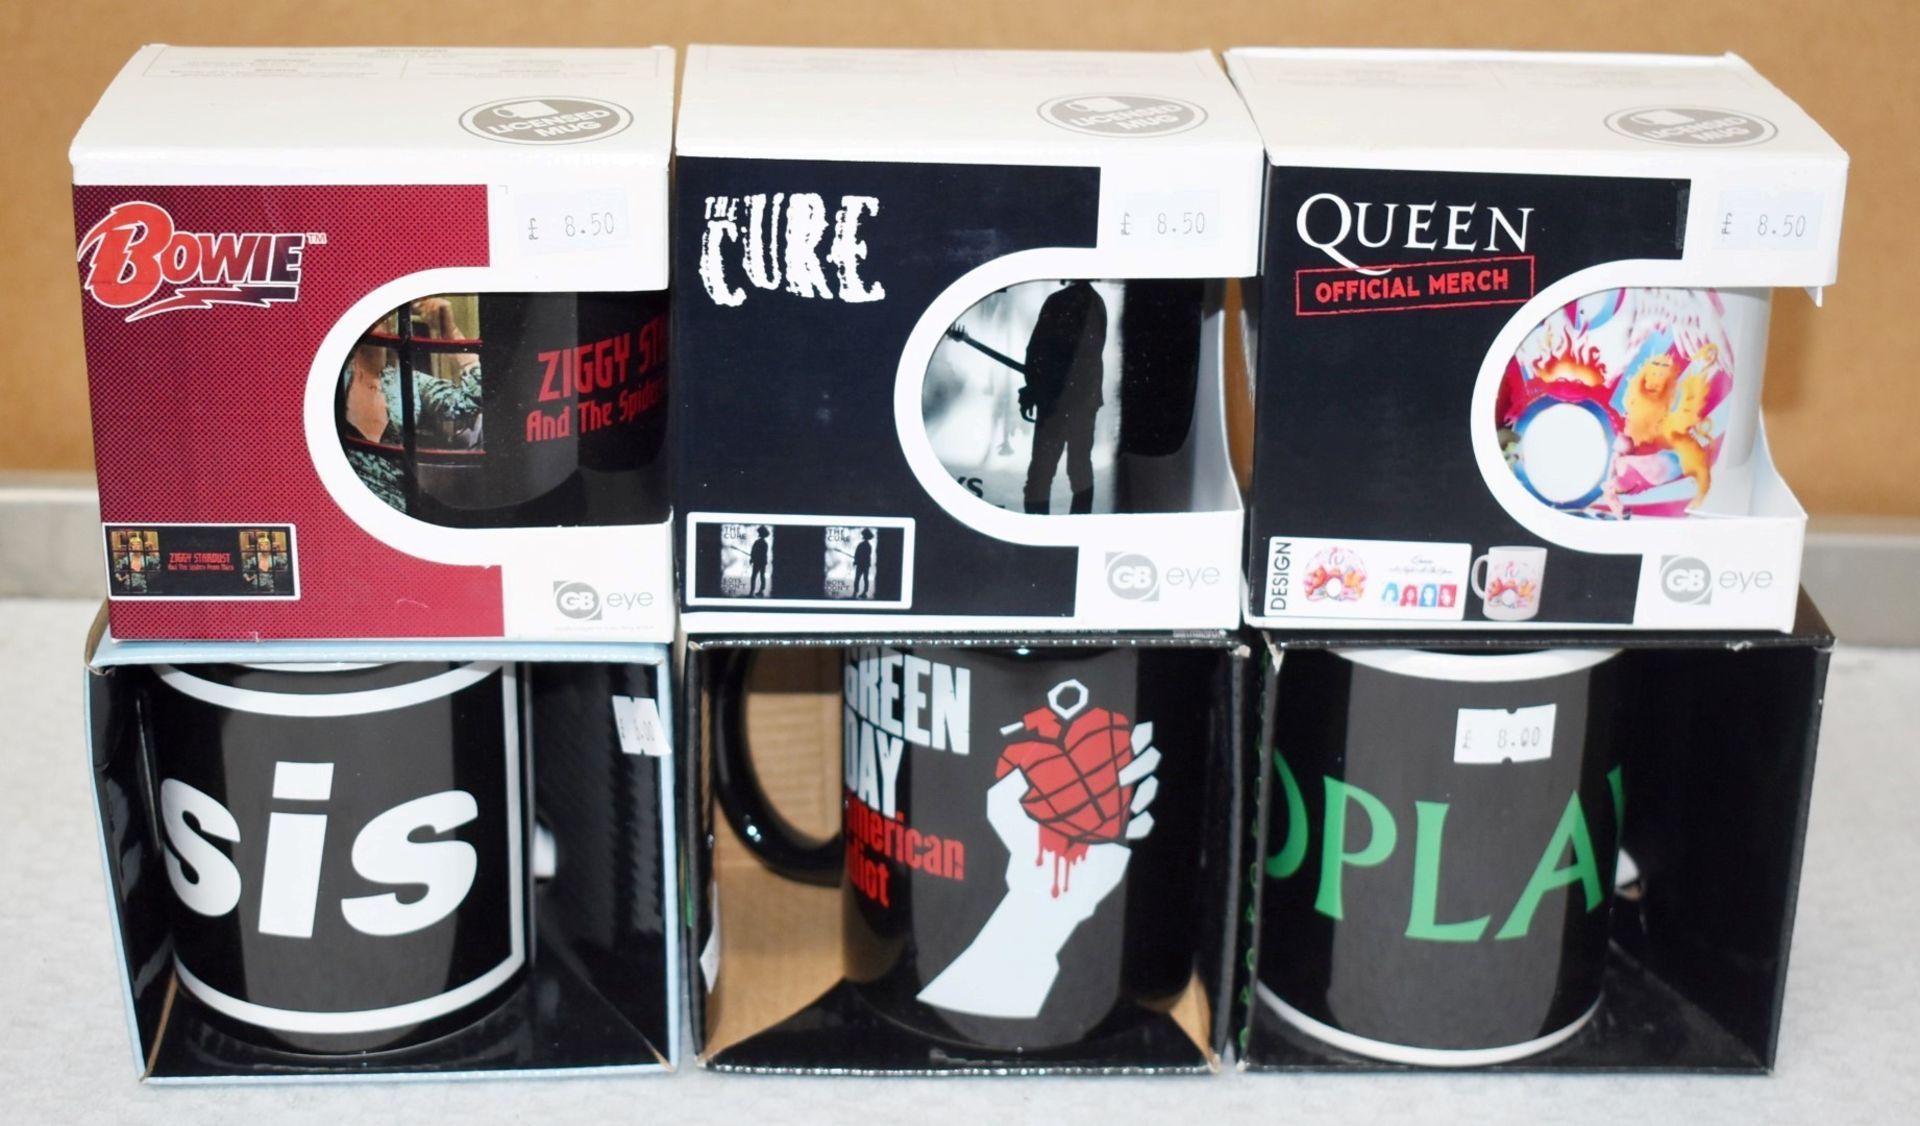 6 x Assorted Rock n Roll Themed Band Drinking Mugs - Includes Green Day, Oasis, Coldplay, Bowie,